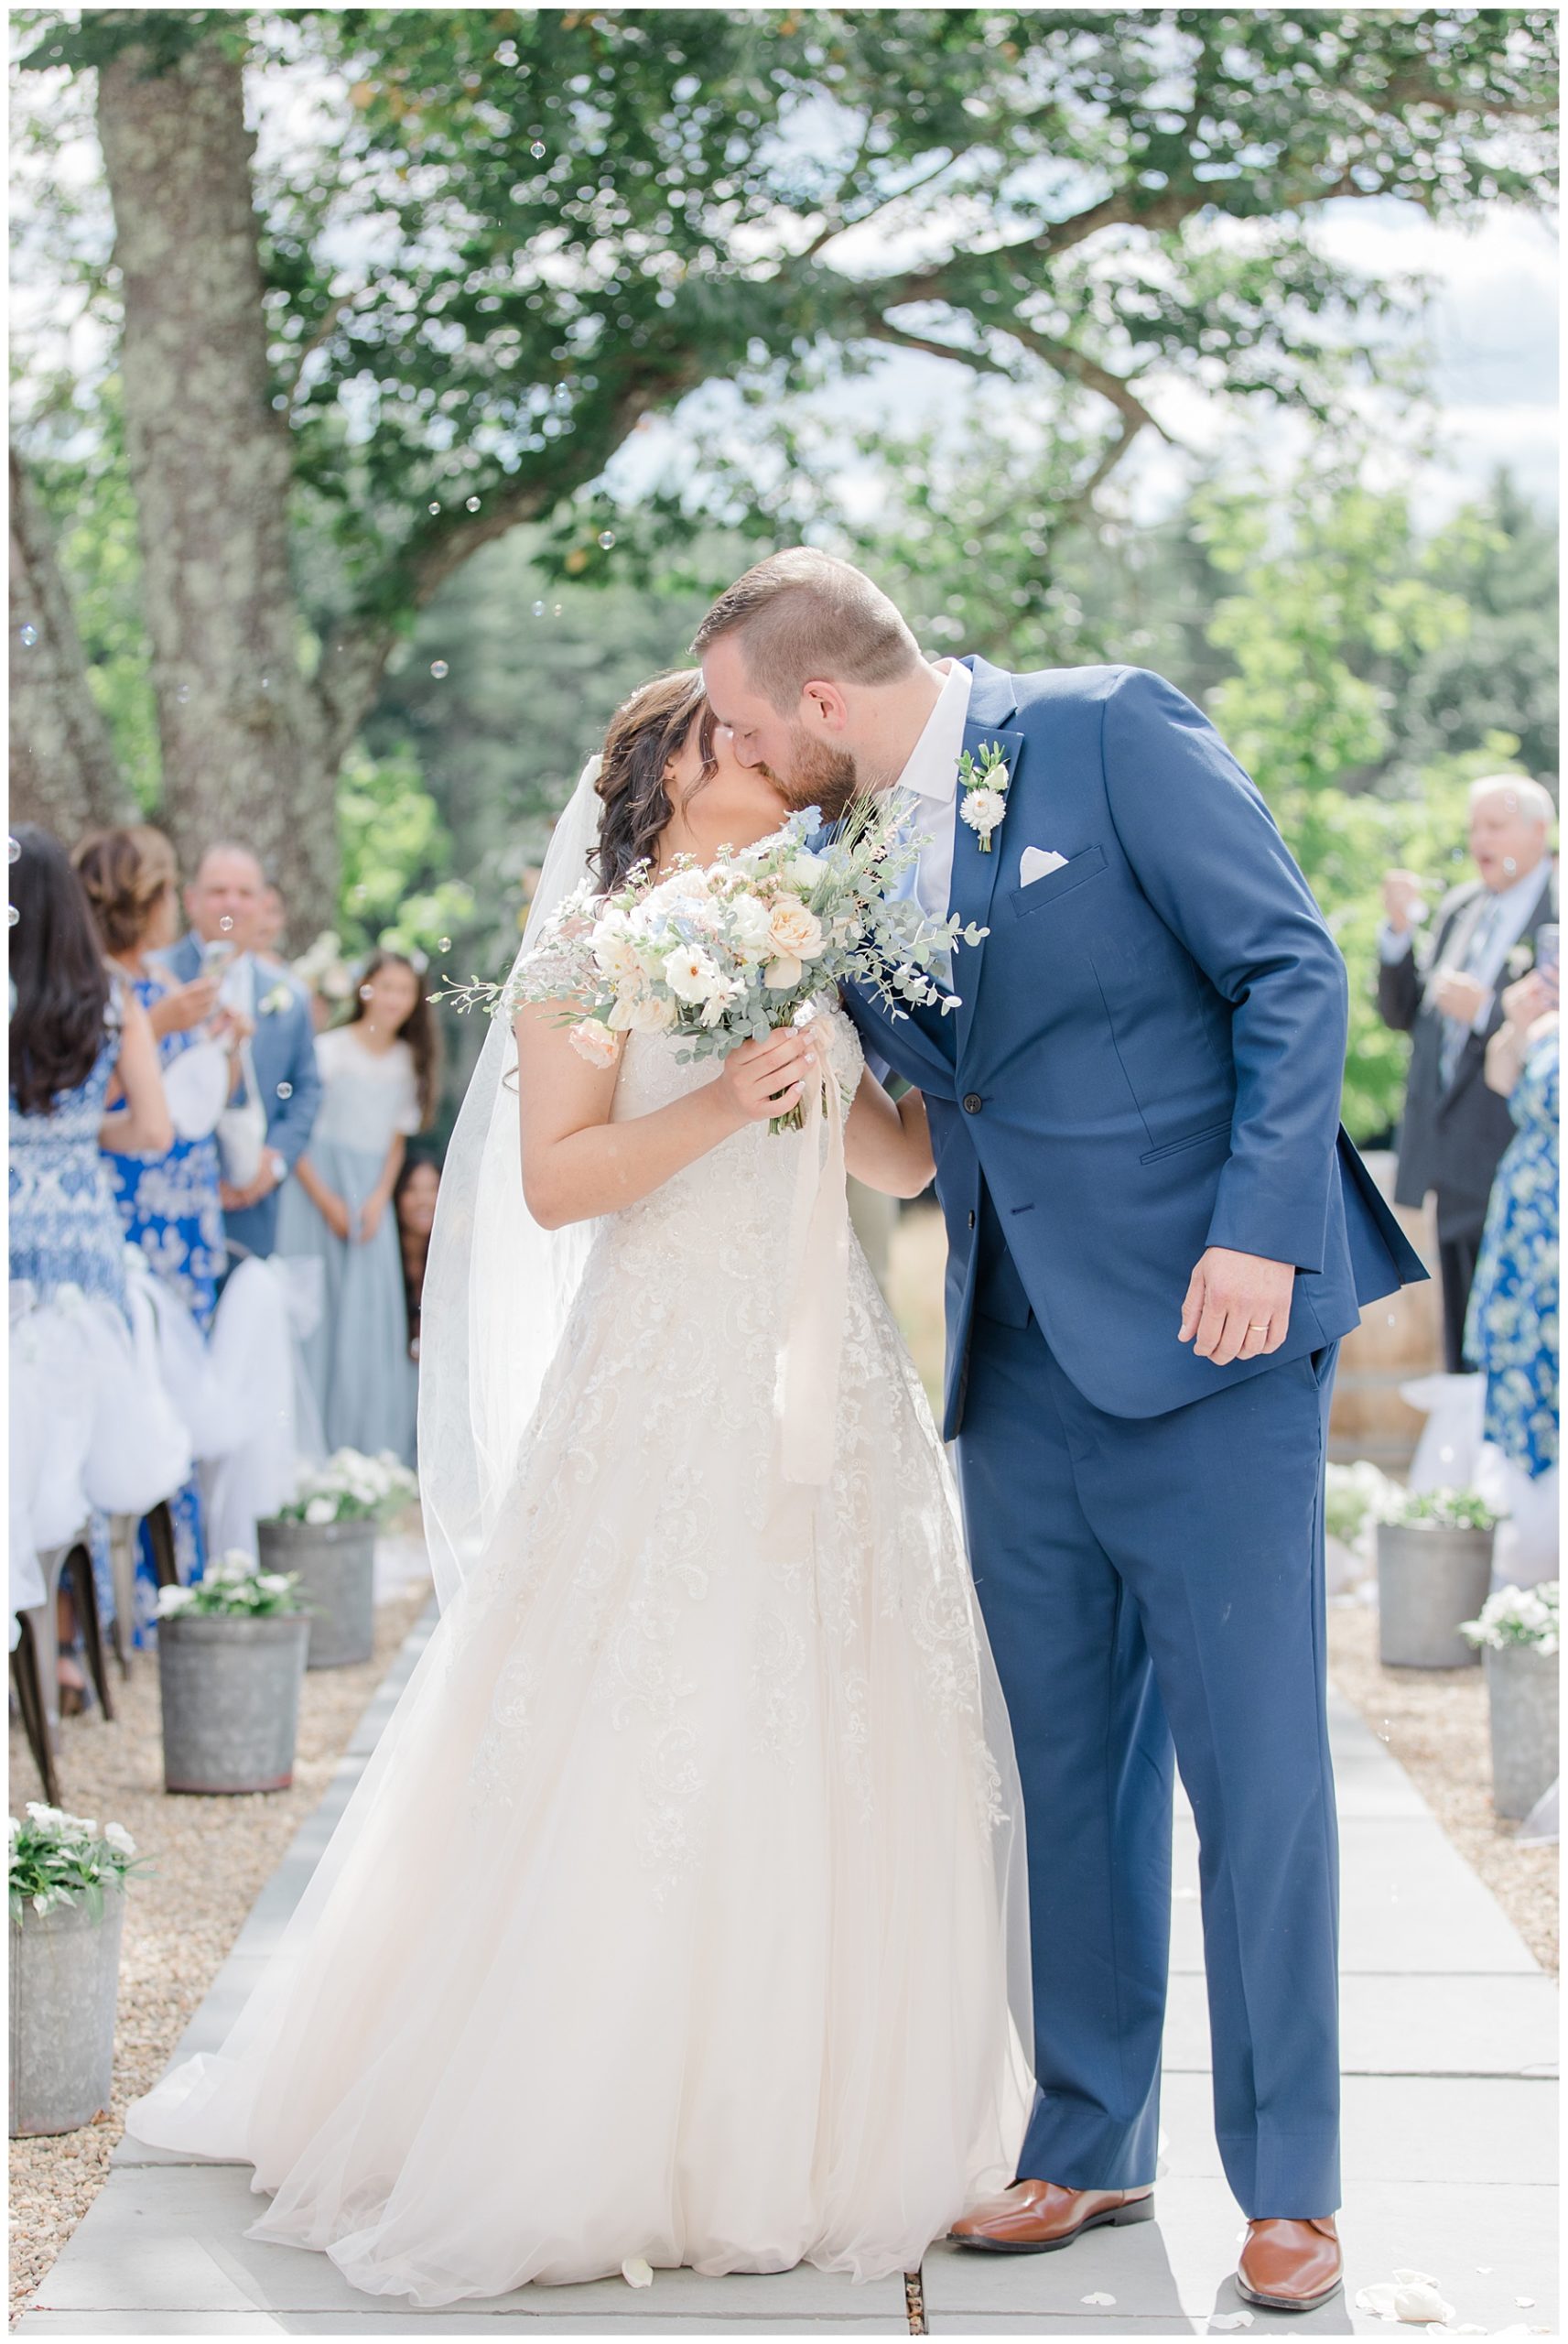 newlyweds kiss as they walk down the aisle together 